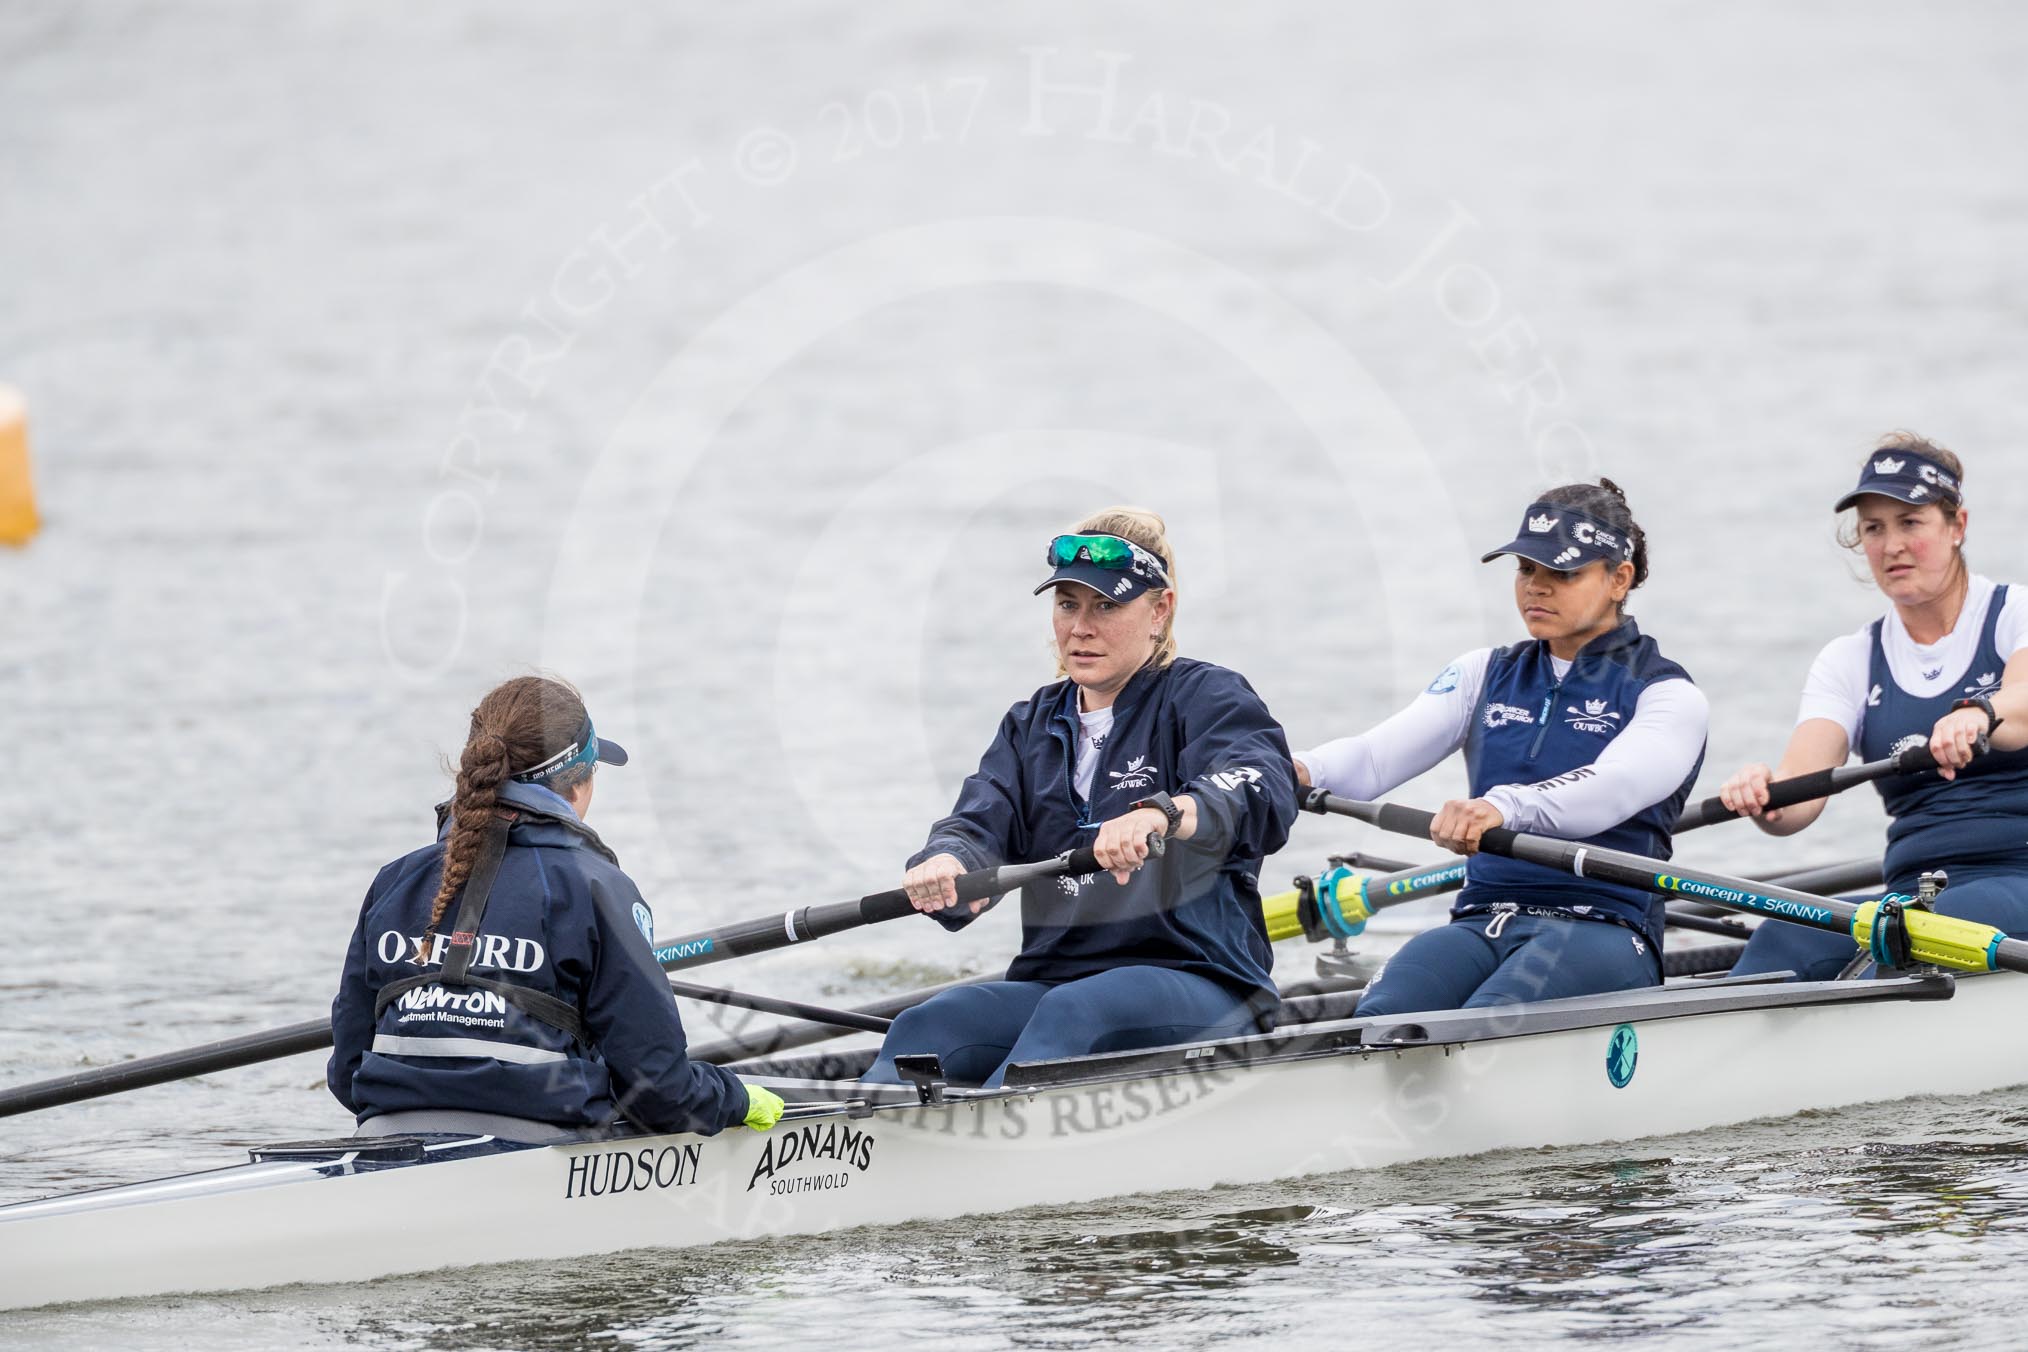 The Cancer Research UK Boat Race season 2017 - Women's Boat Race Fixture OUWBC vs Molesey BC: The OUWBC boat, here cox Eleanor Shearer, stroke Emily Cameron, 7 seat Jenna Hebert, and 6 seat Harriet Austin.
River Thames between Putney Bridge and Mortlake,
London SW15,

United Kingdom,
on 19 March 2017 at 15:21, image #19